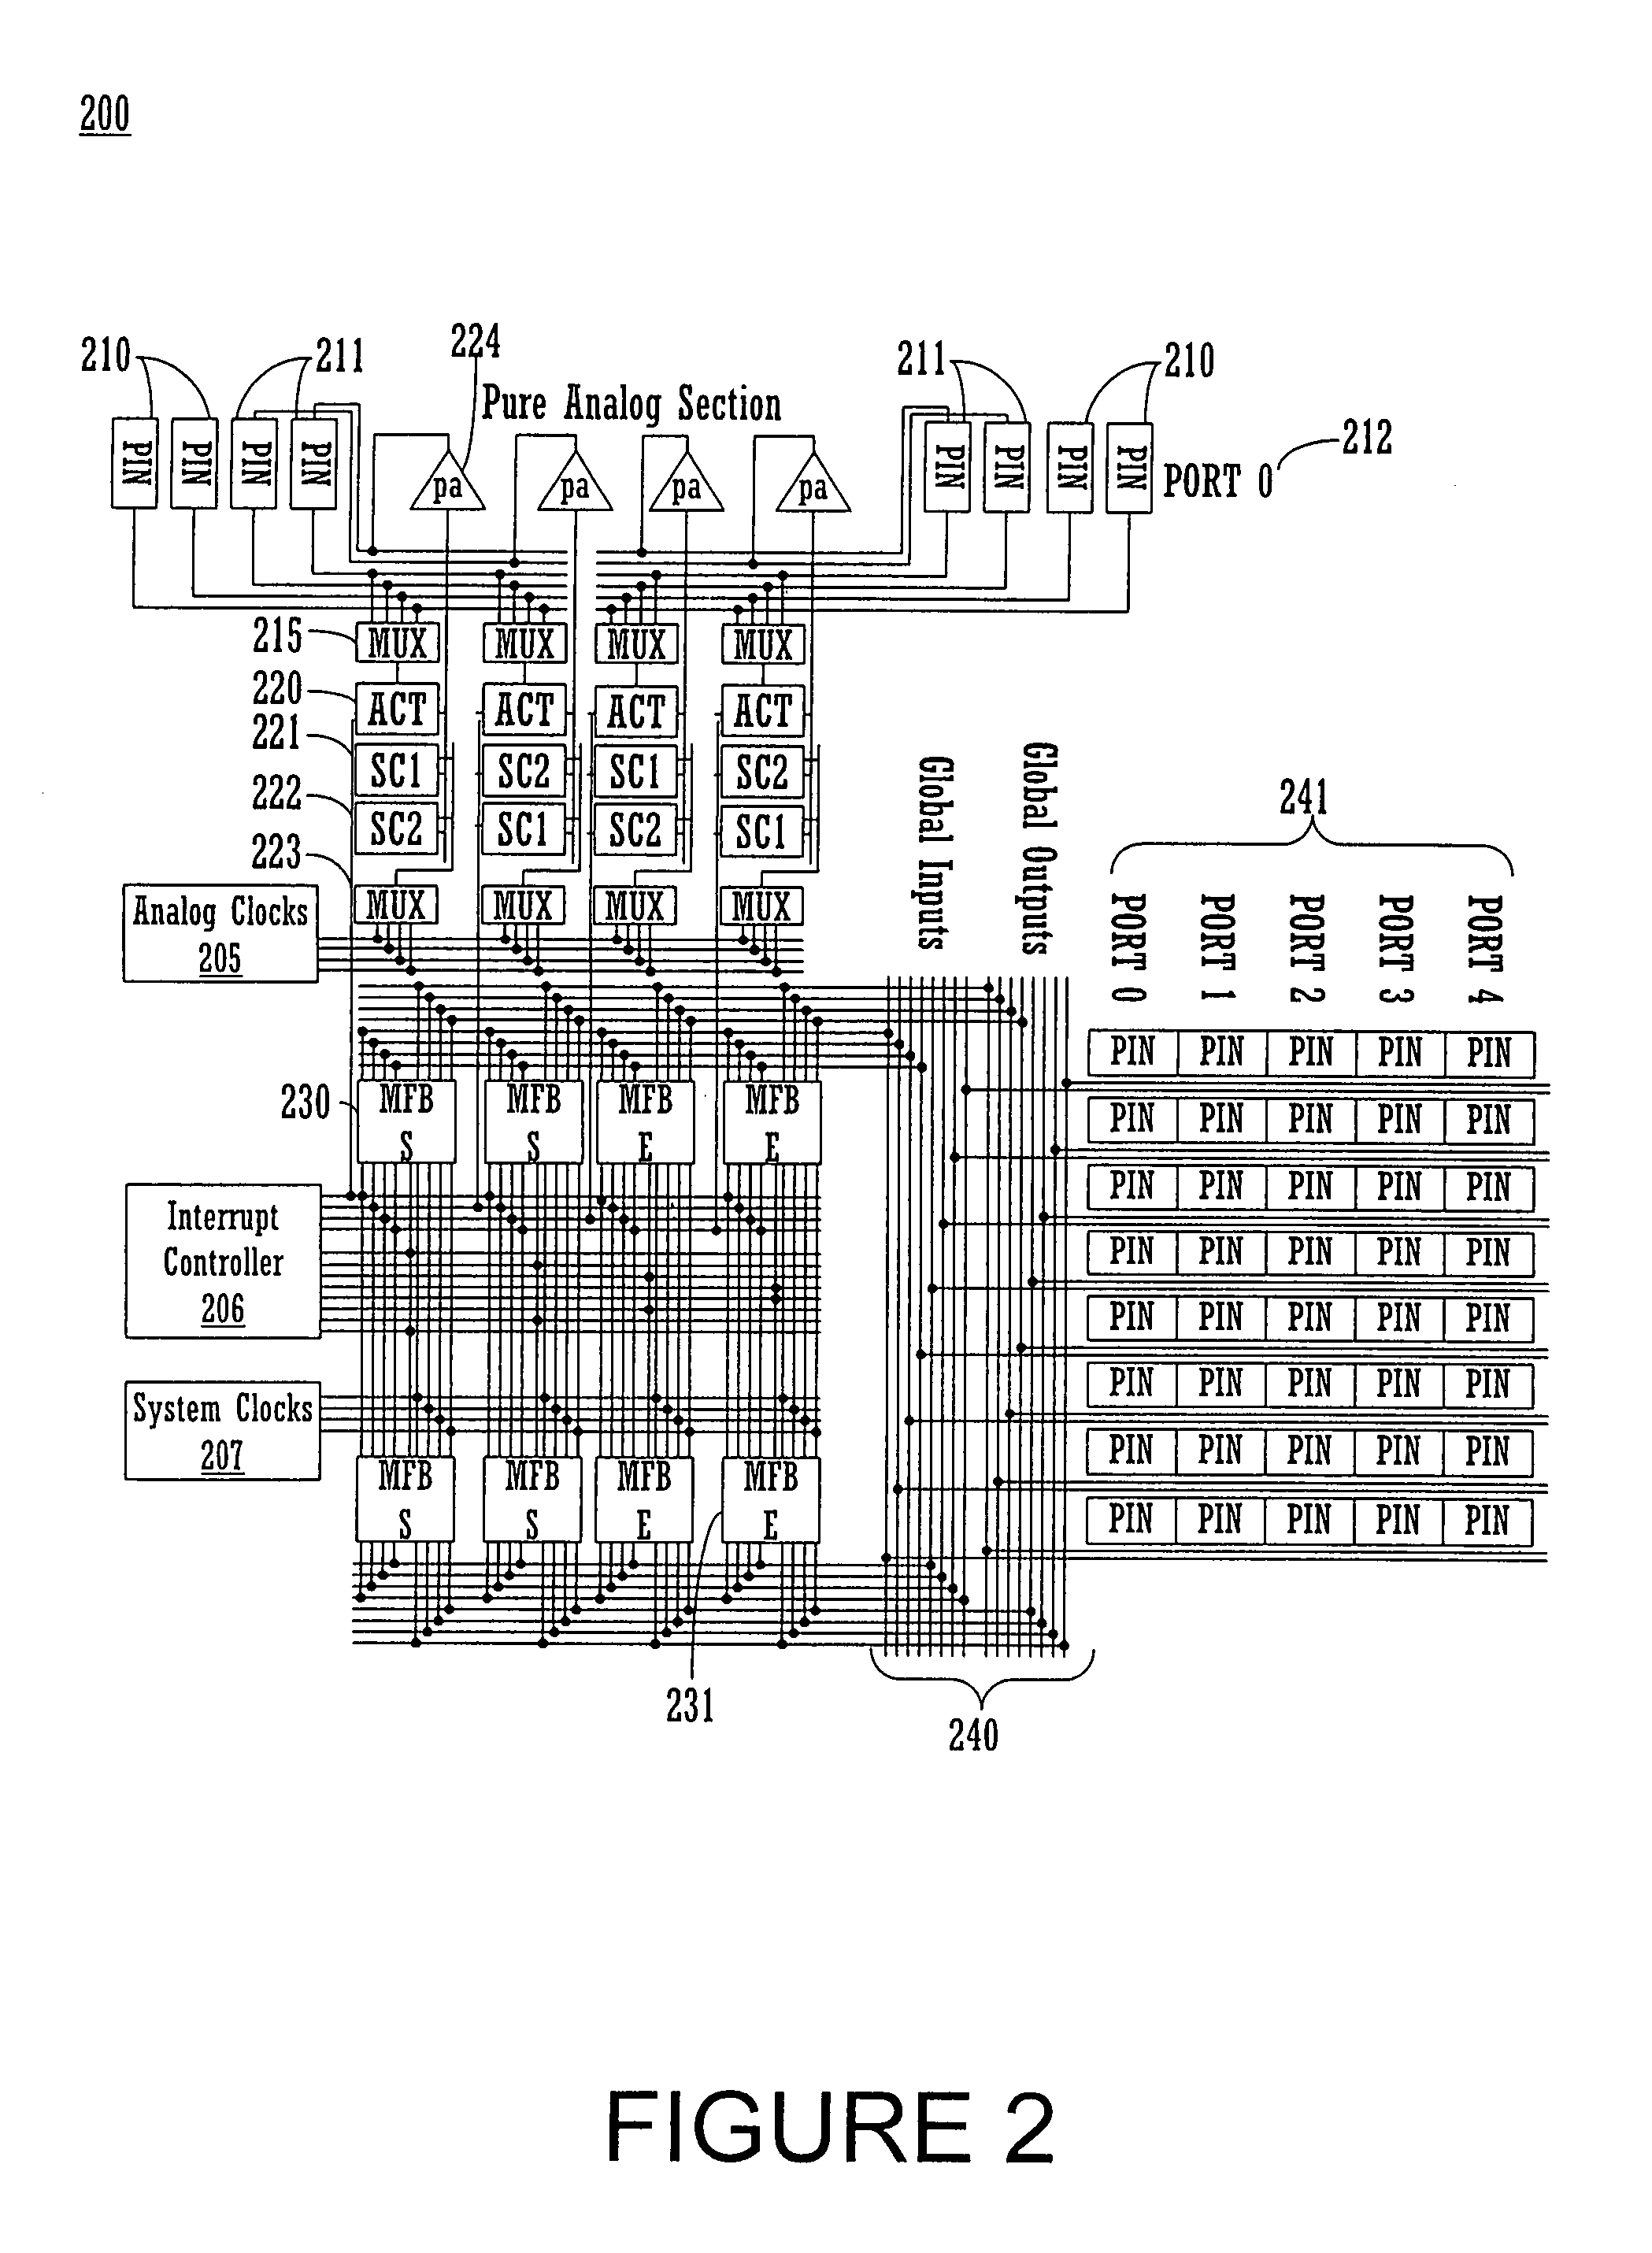 Programmable microcontroller architecture(mixed analog/digital)